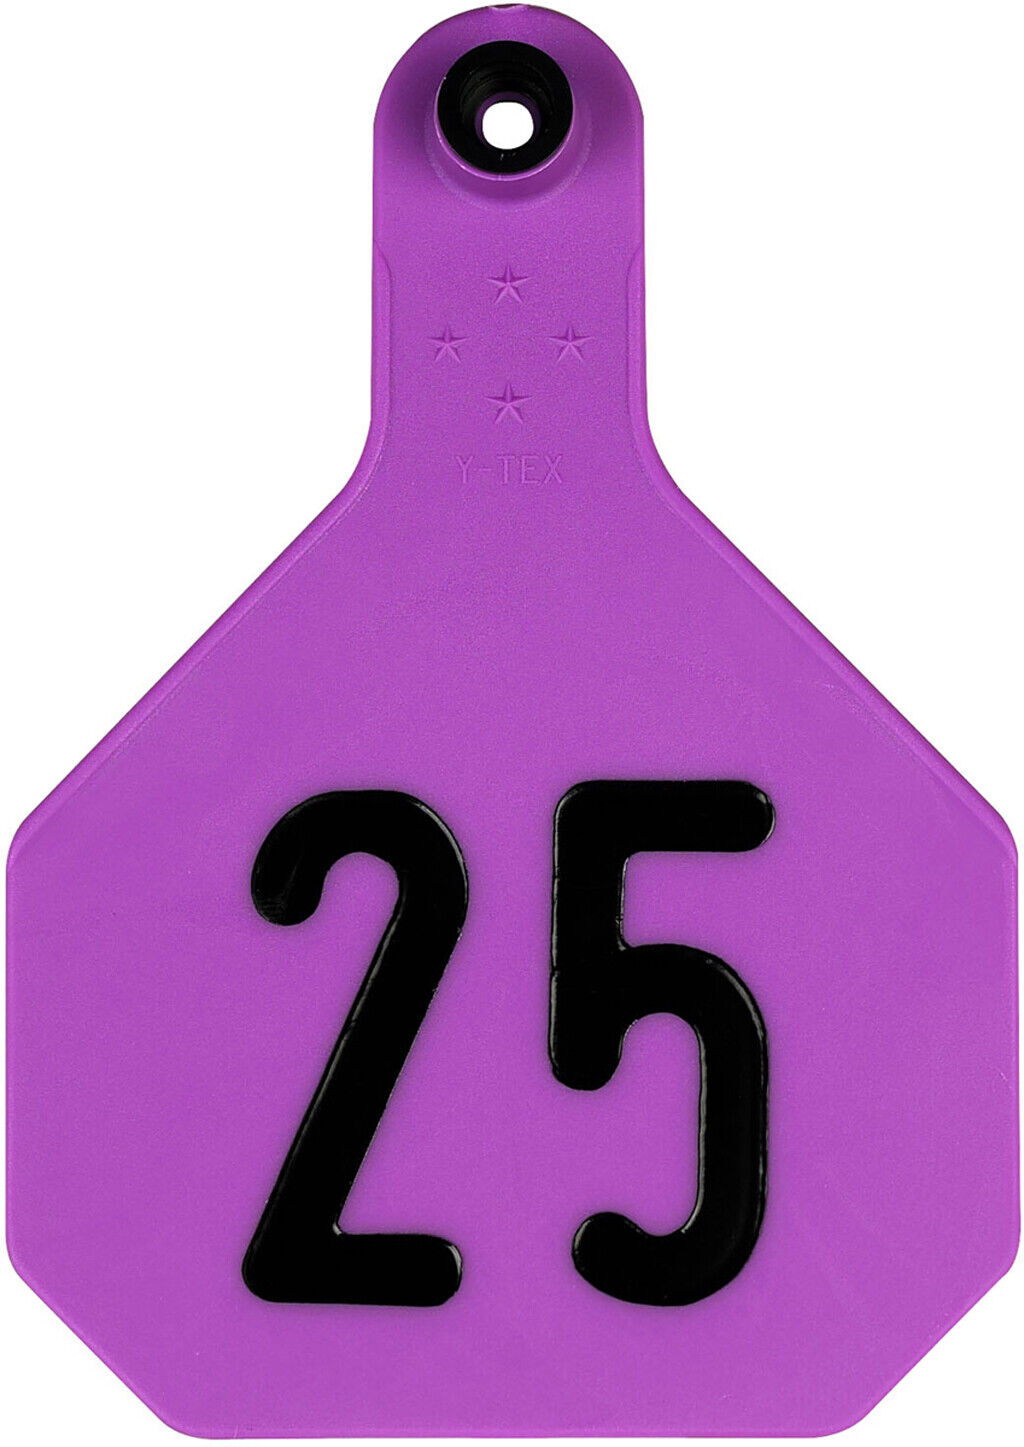 Y-Tex Large 4 Star Cattle Ear Tags Purple Numbered 26-50